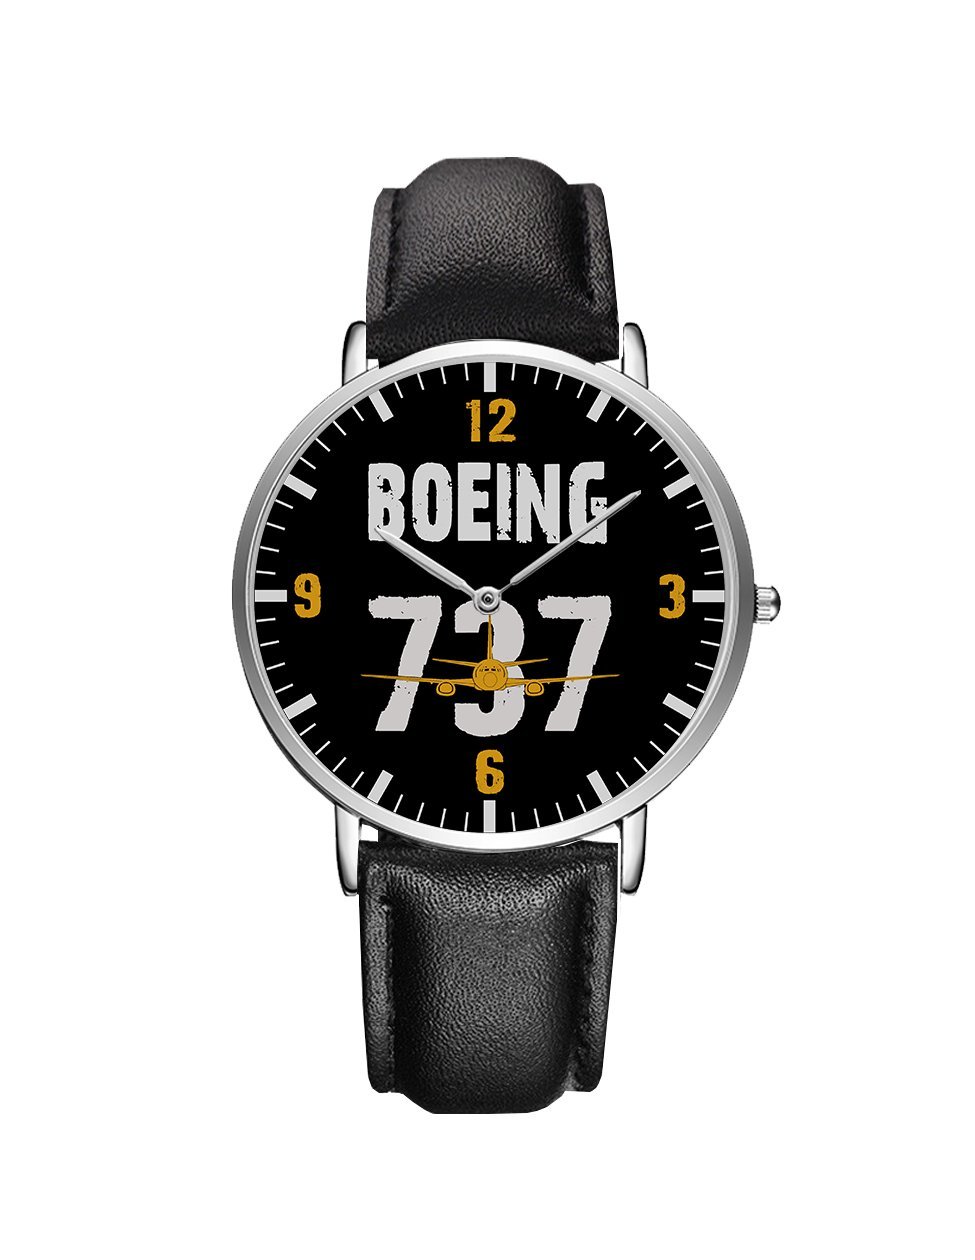 Boeing 737 Designed Leather Strap Watches Pilot Eyes Store Silver & Black Leather Strap 